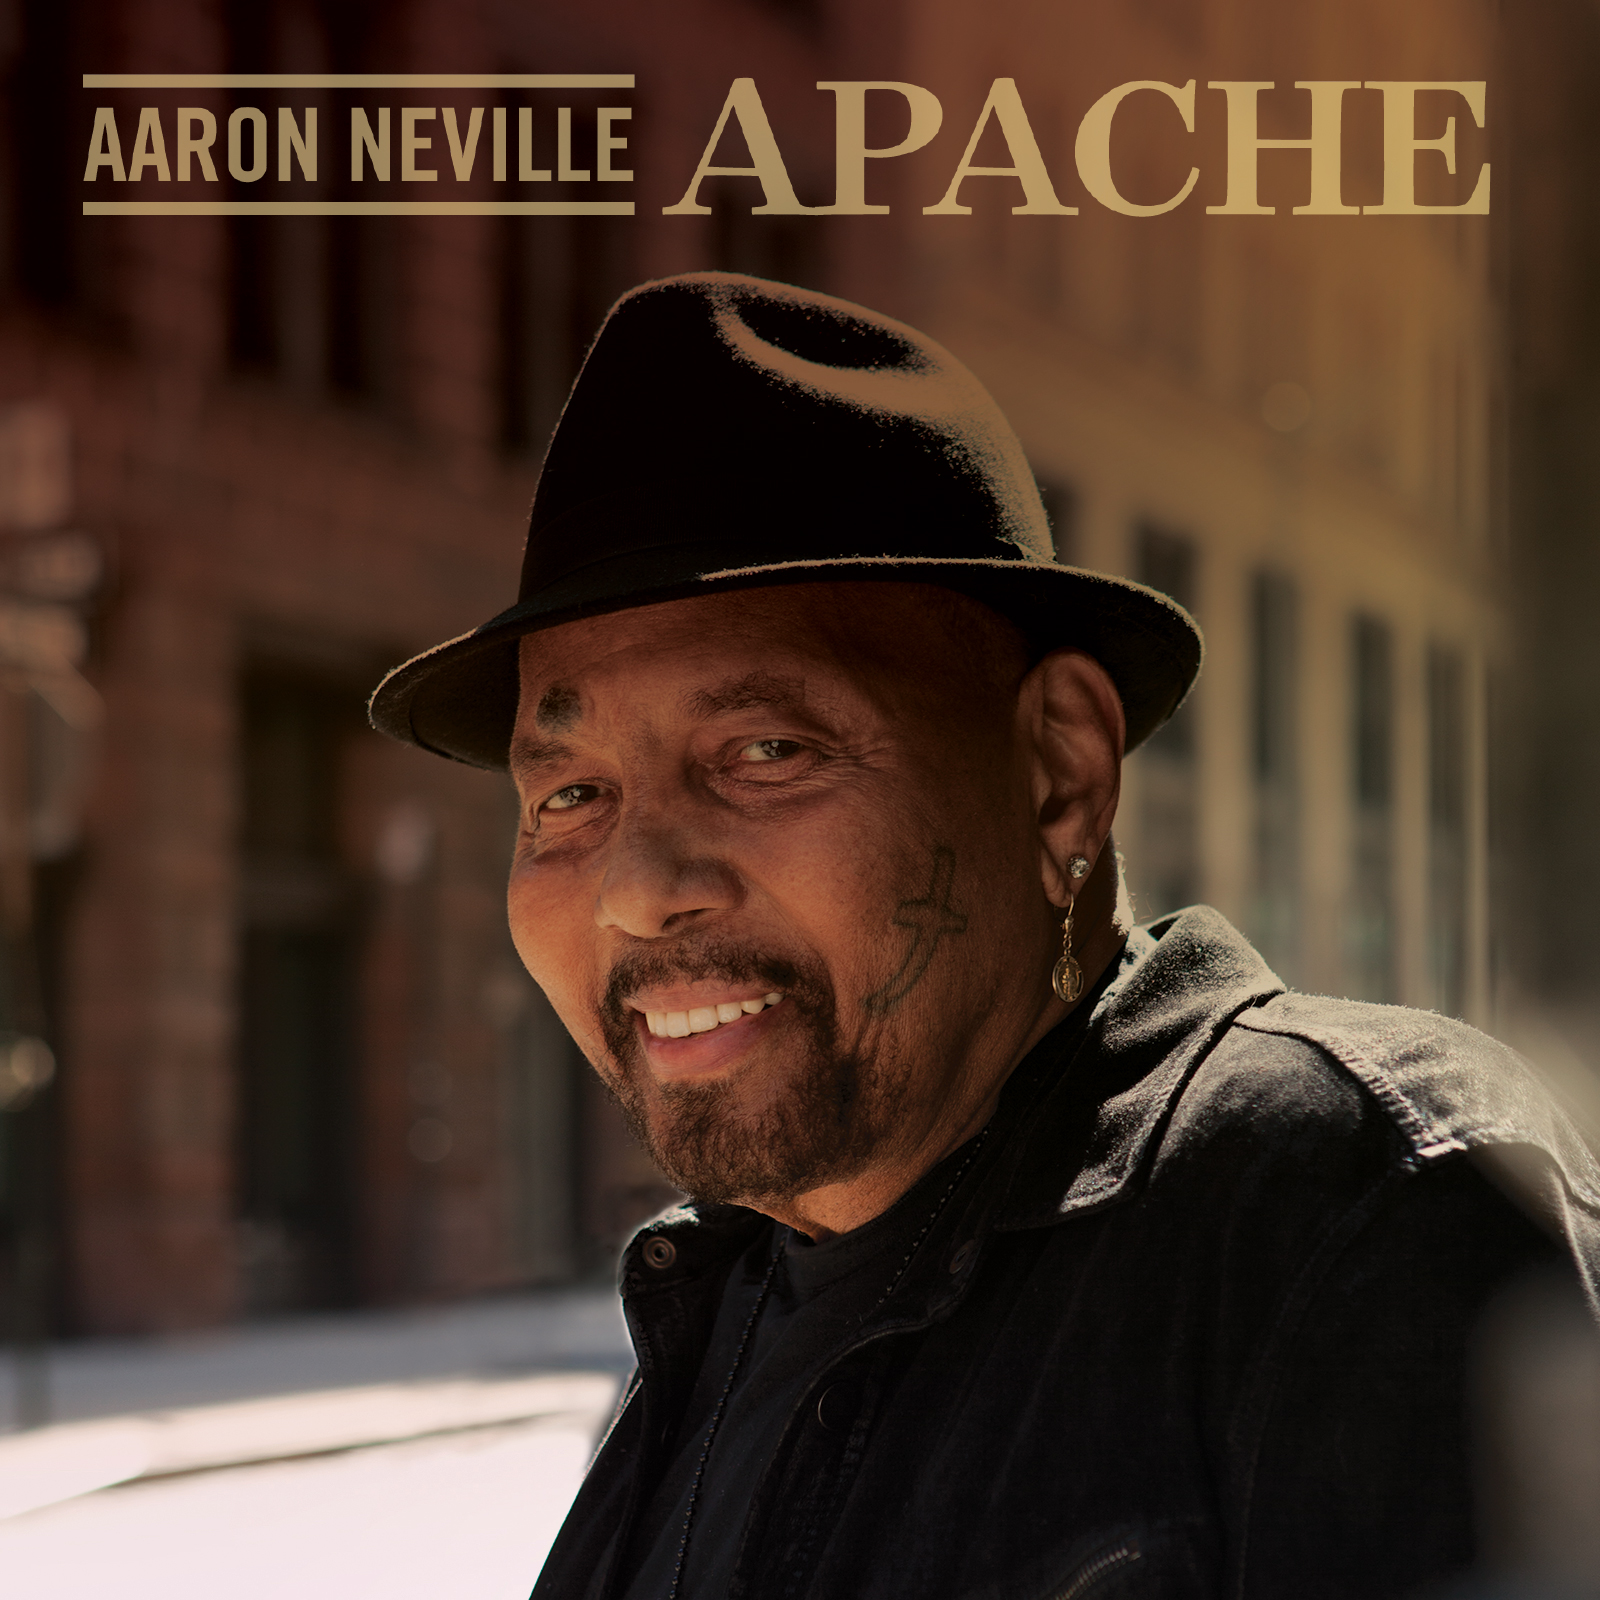 Aaron Neville, Apache album cover. Photo by: Red Light Management